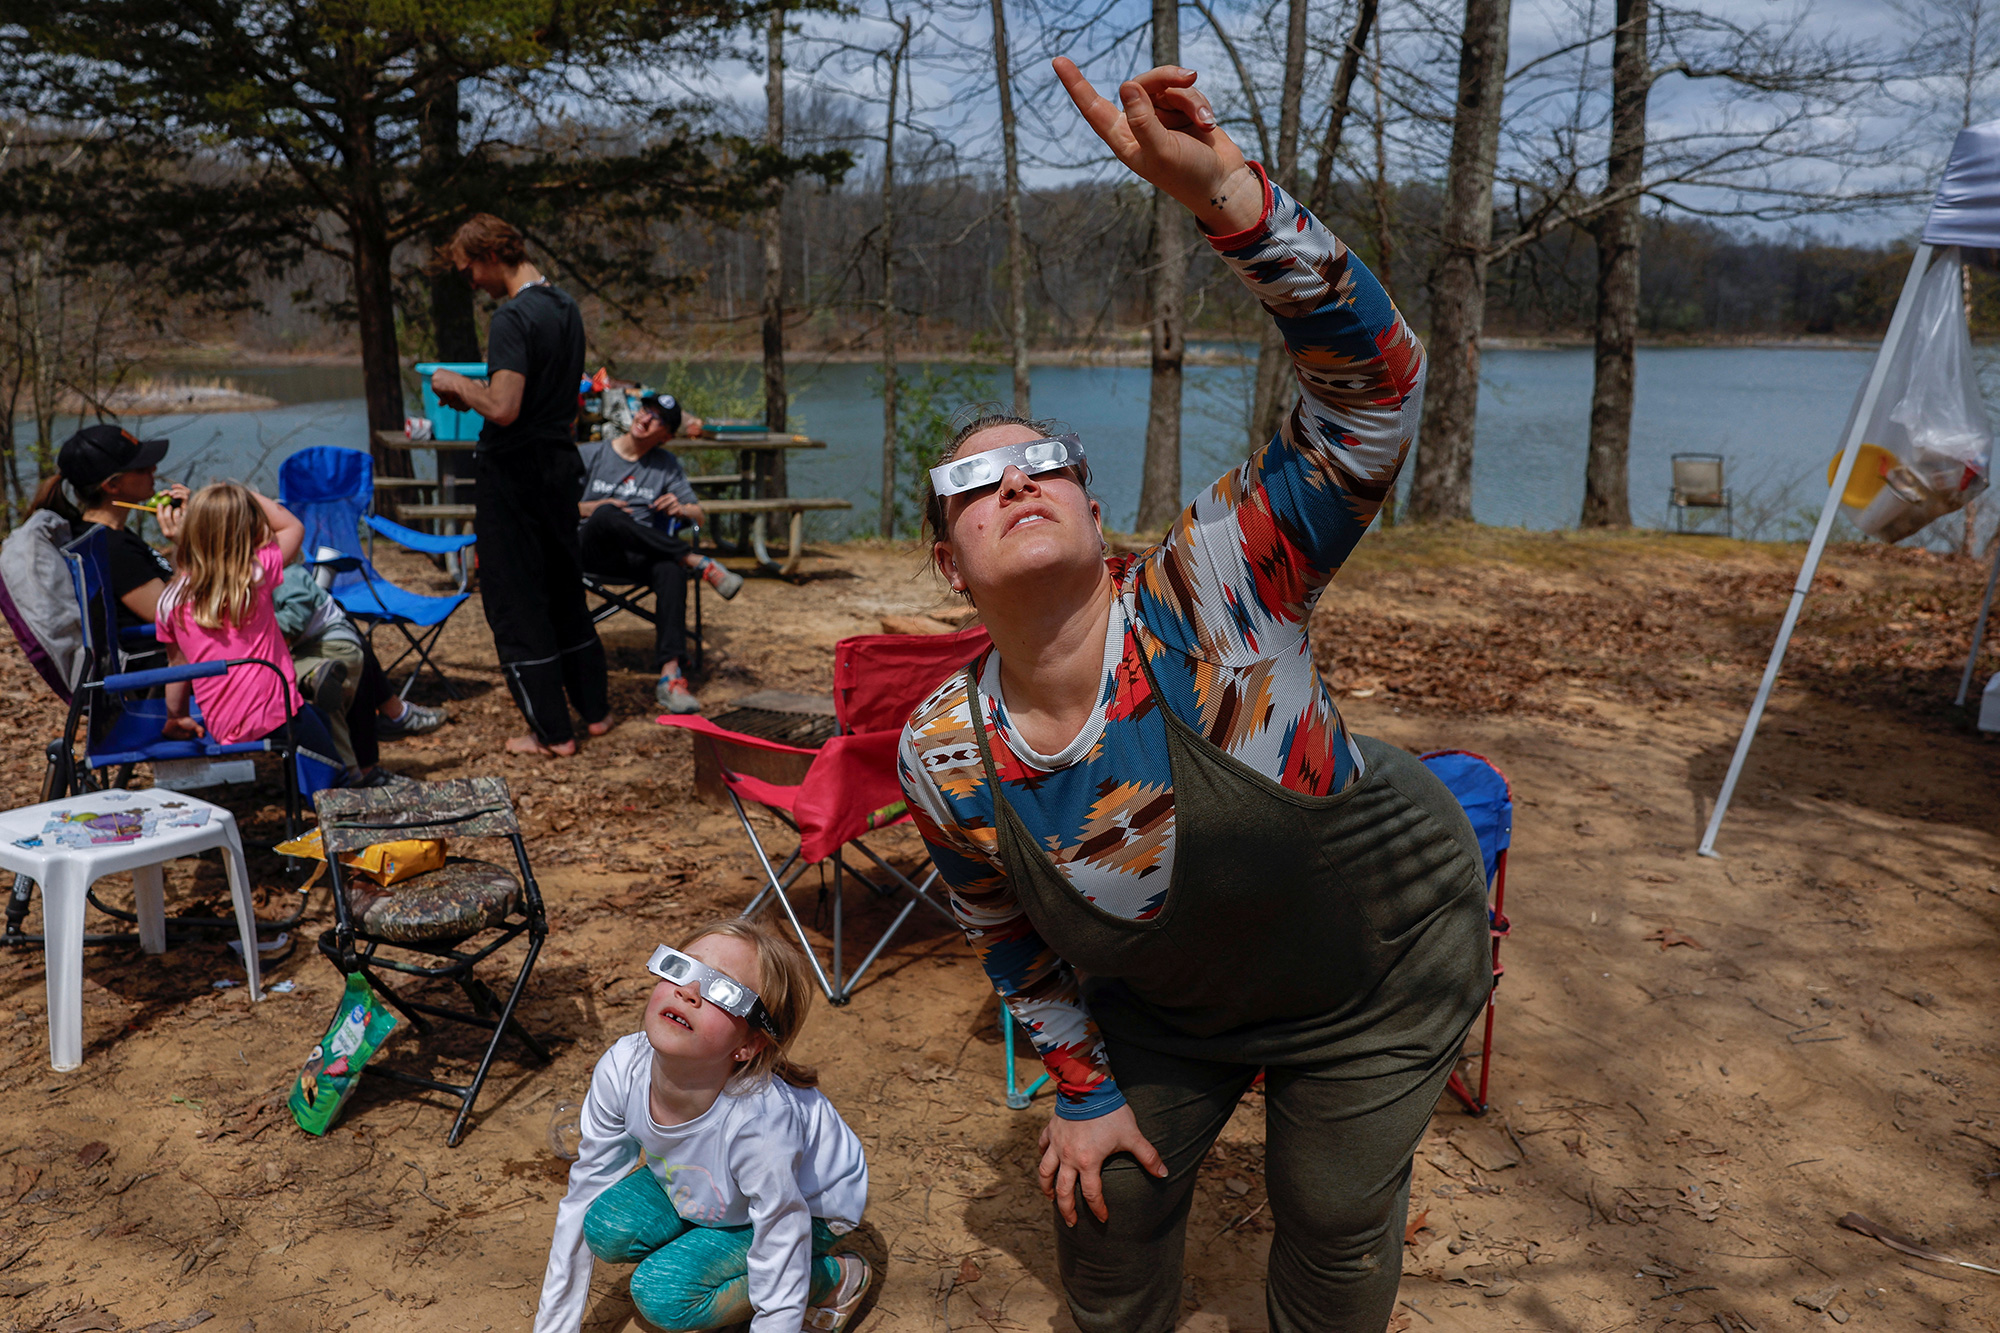 Brittany Sunderman, right, and Gianna Debenham, try out their eclipse viewing glasses at their campsite a day ahead of the eclipse event at Camp Carew in Makanda, Illinois, on April 7, 2024.